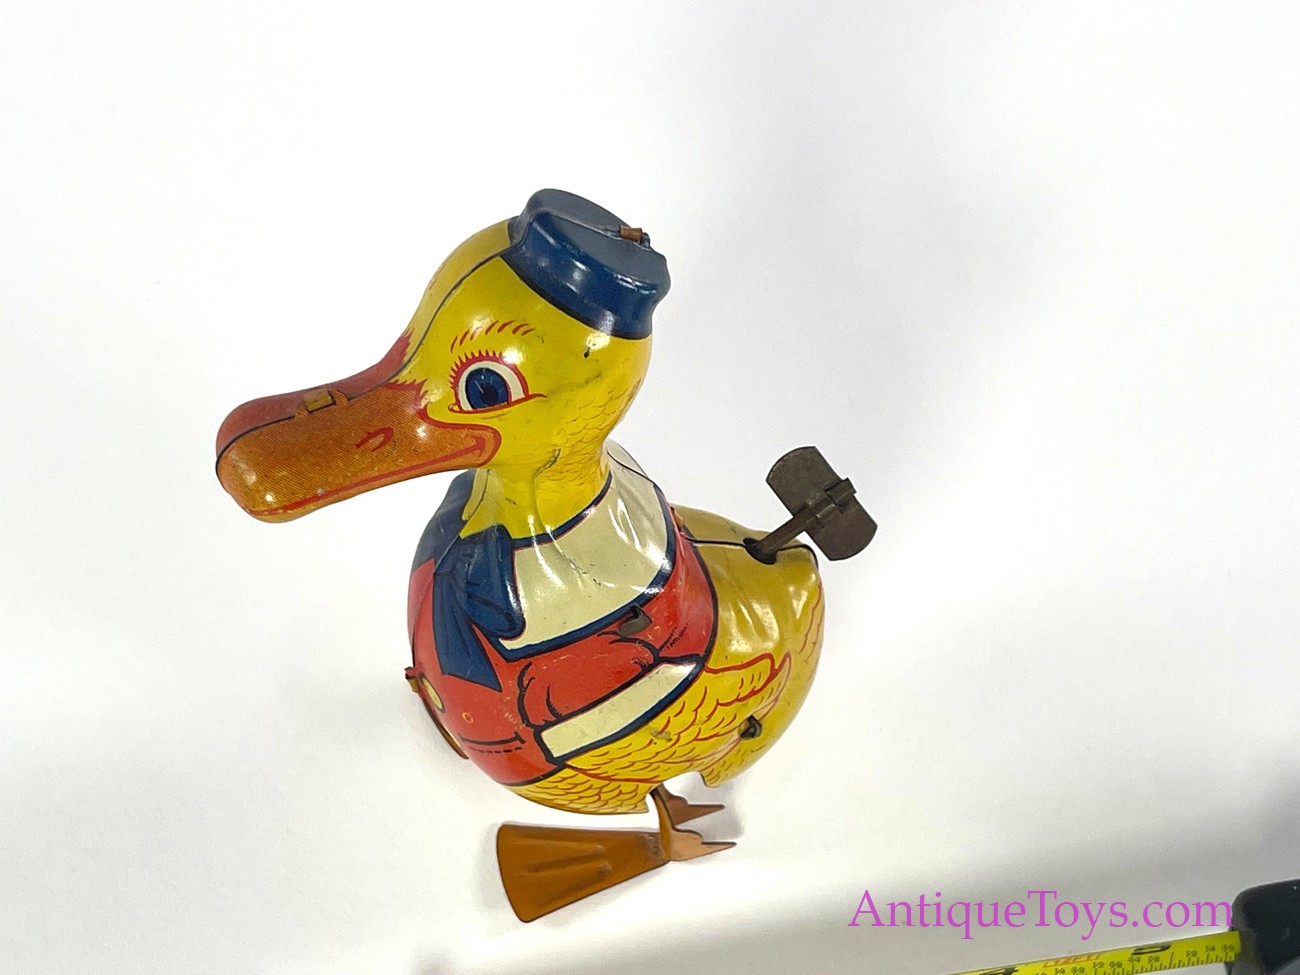 J. Chein Tin Lithographed Windup #102 Walking “Donald” Duck Toy for Sale -   - Antique Toys for Sale